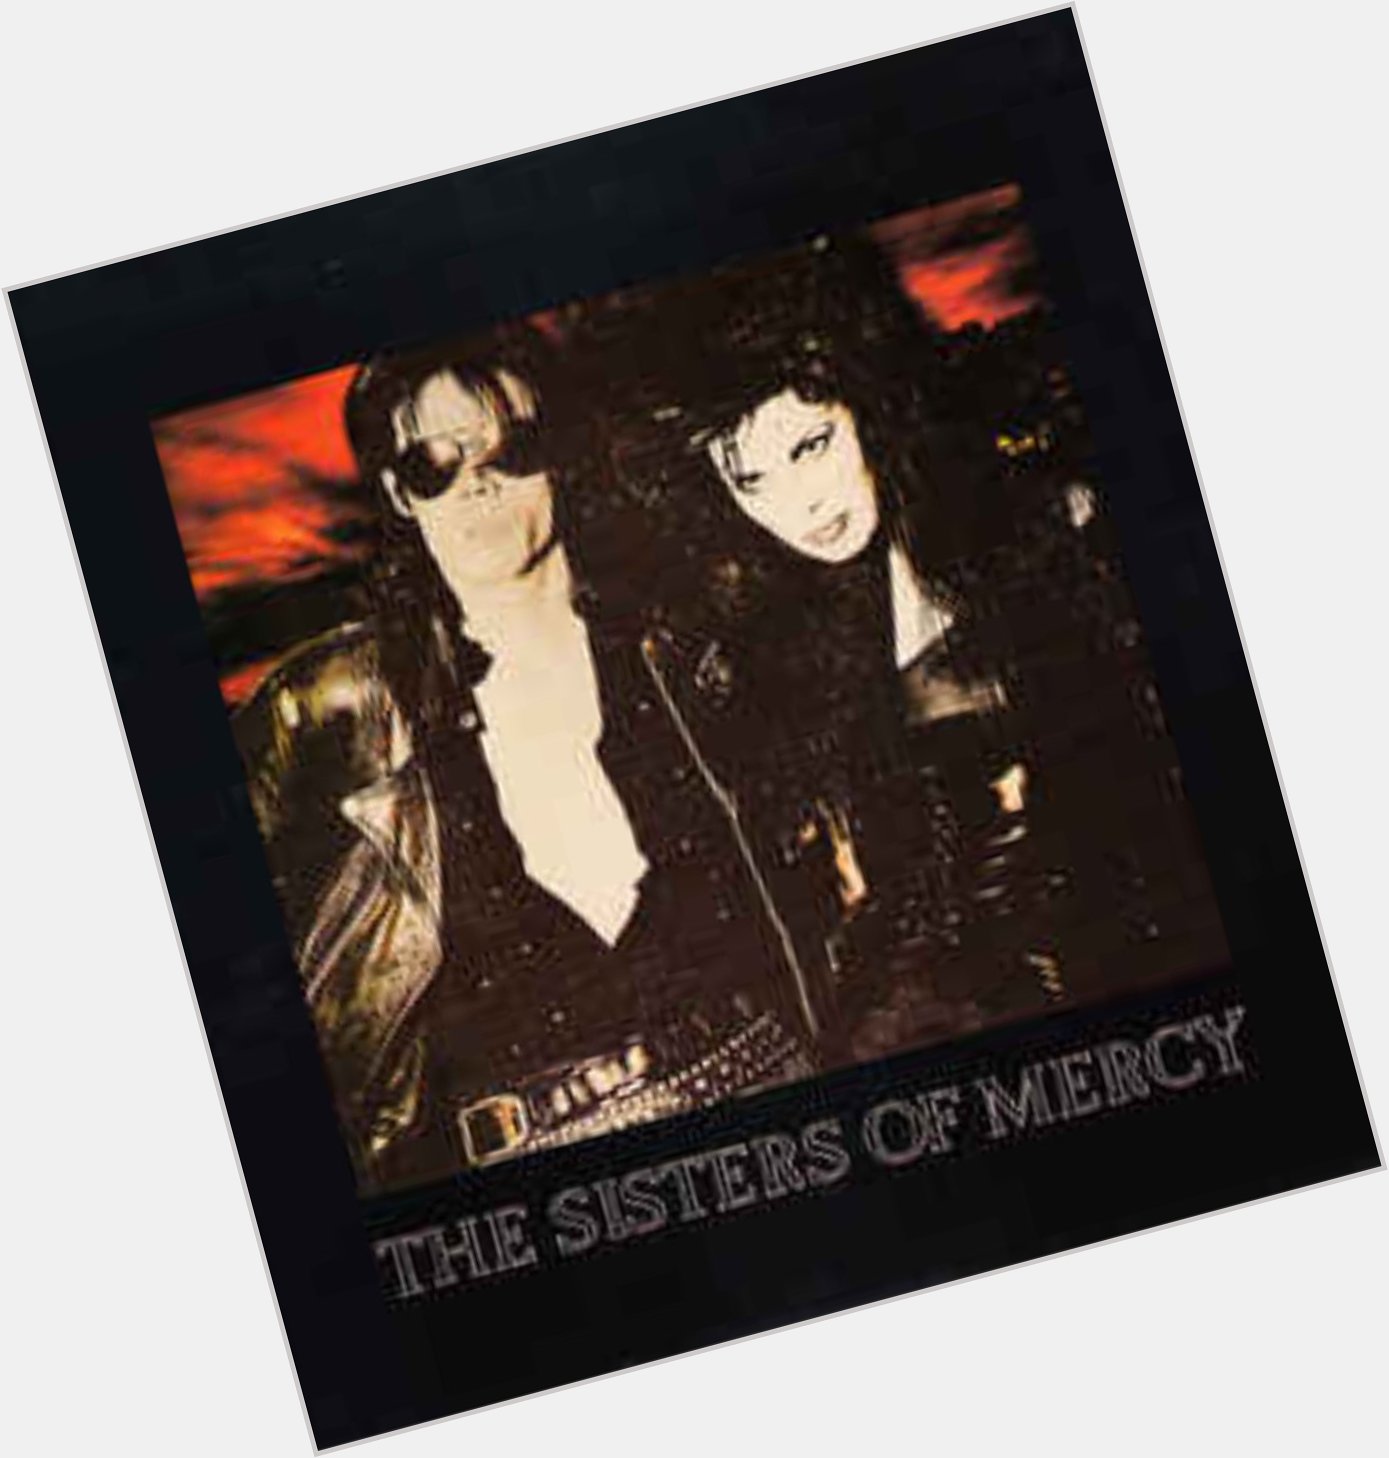 Sisters of Mercy This Corrosion Happy Birthday To Andrew Eldritch. 